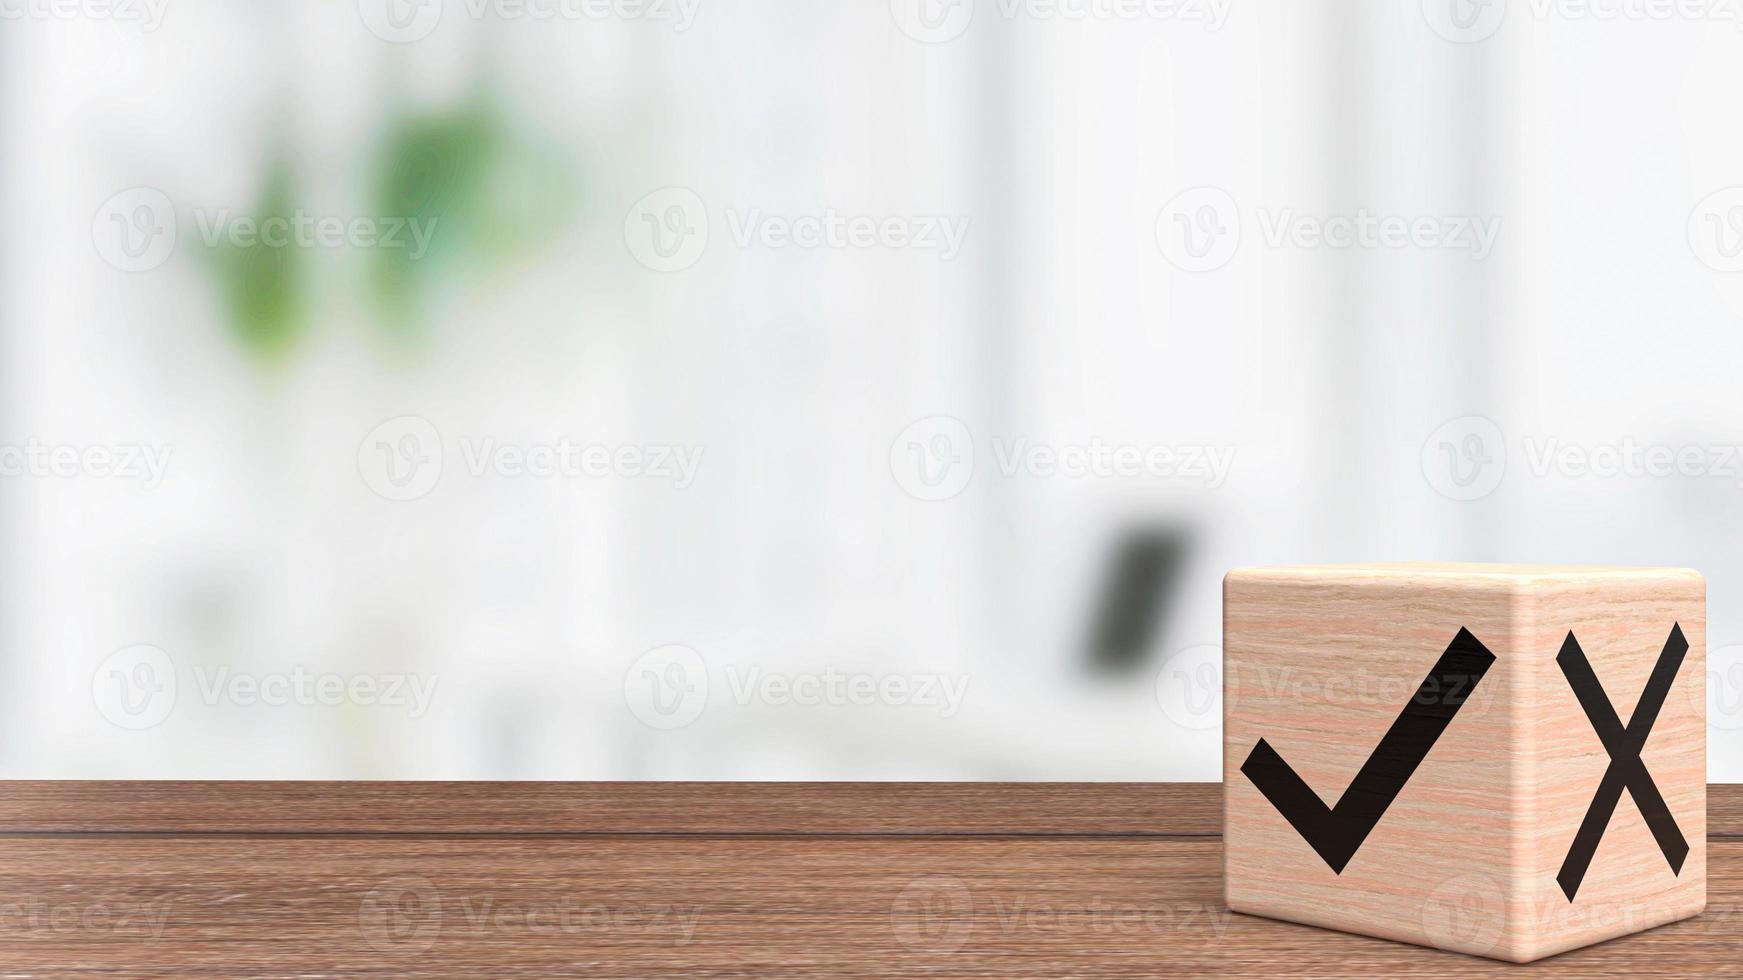 The right and wrong symbol on wood cube 3d rendering photo